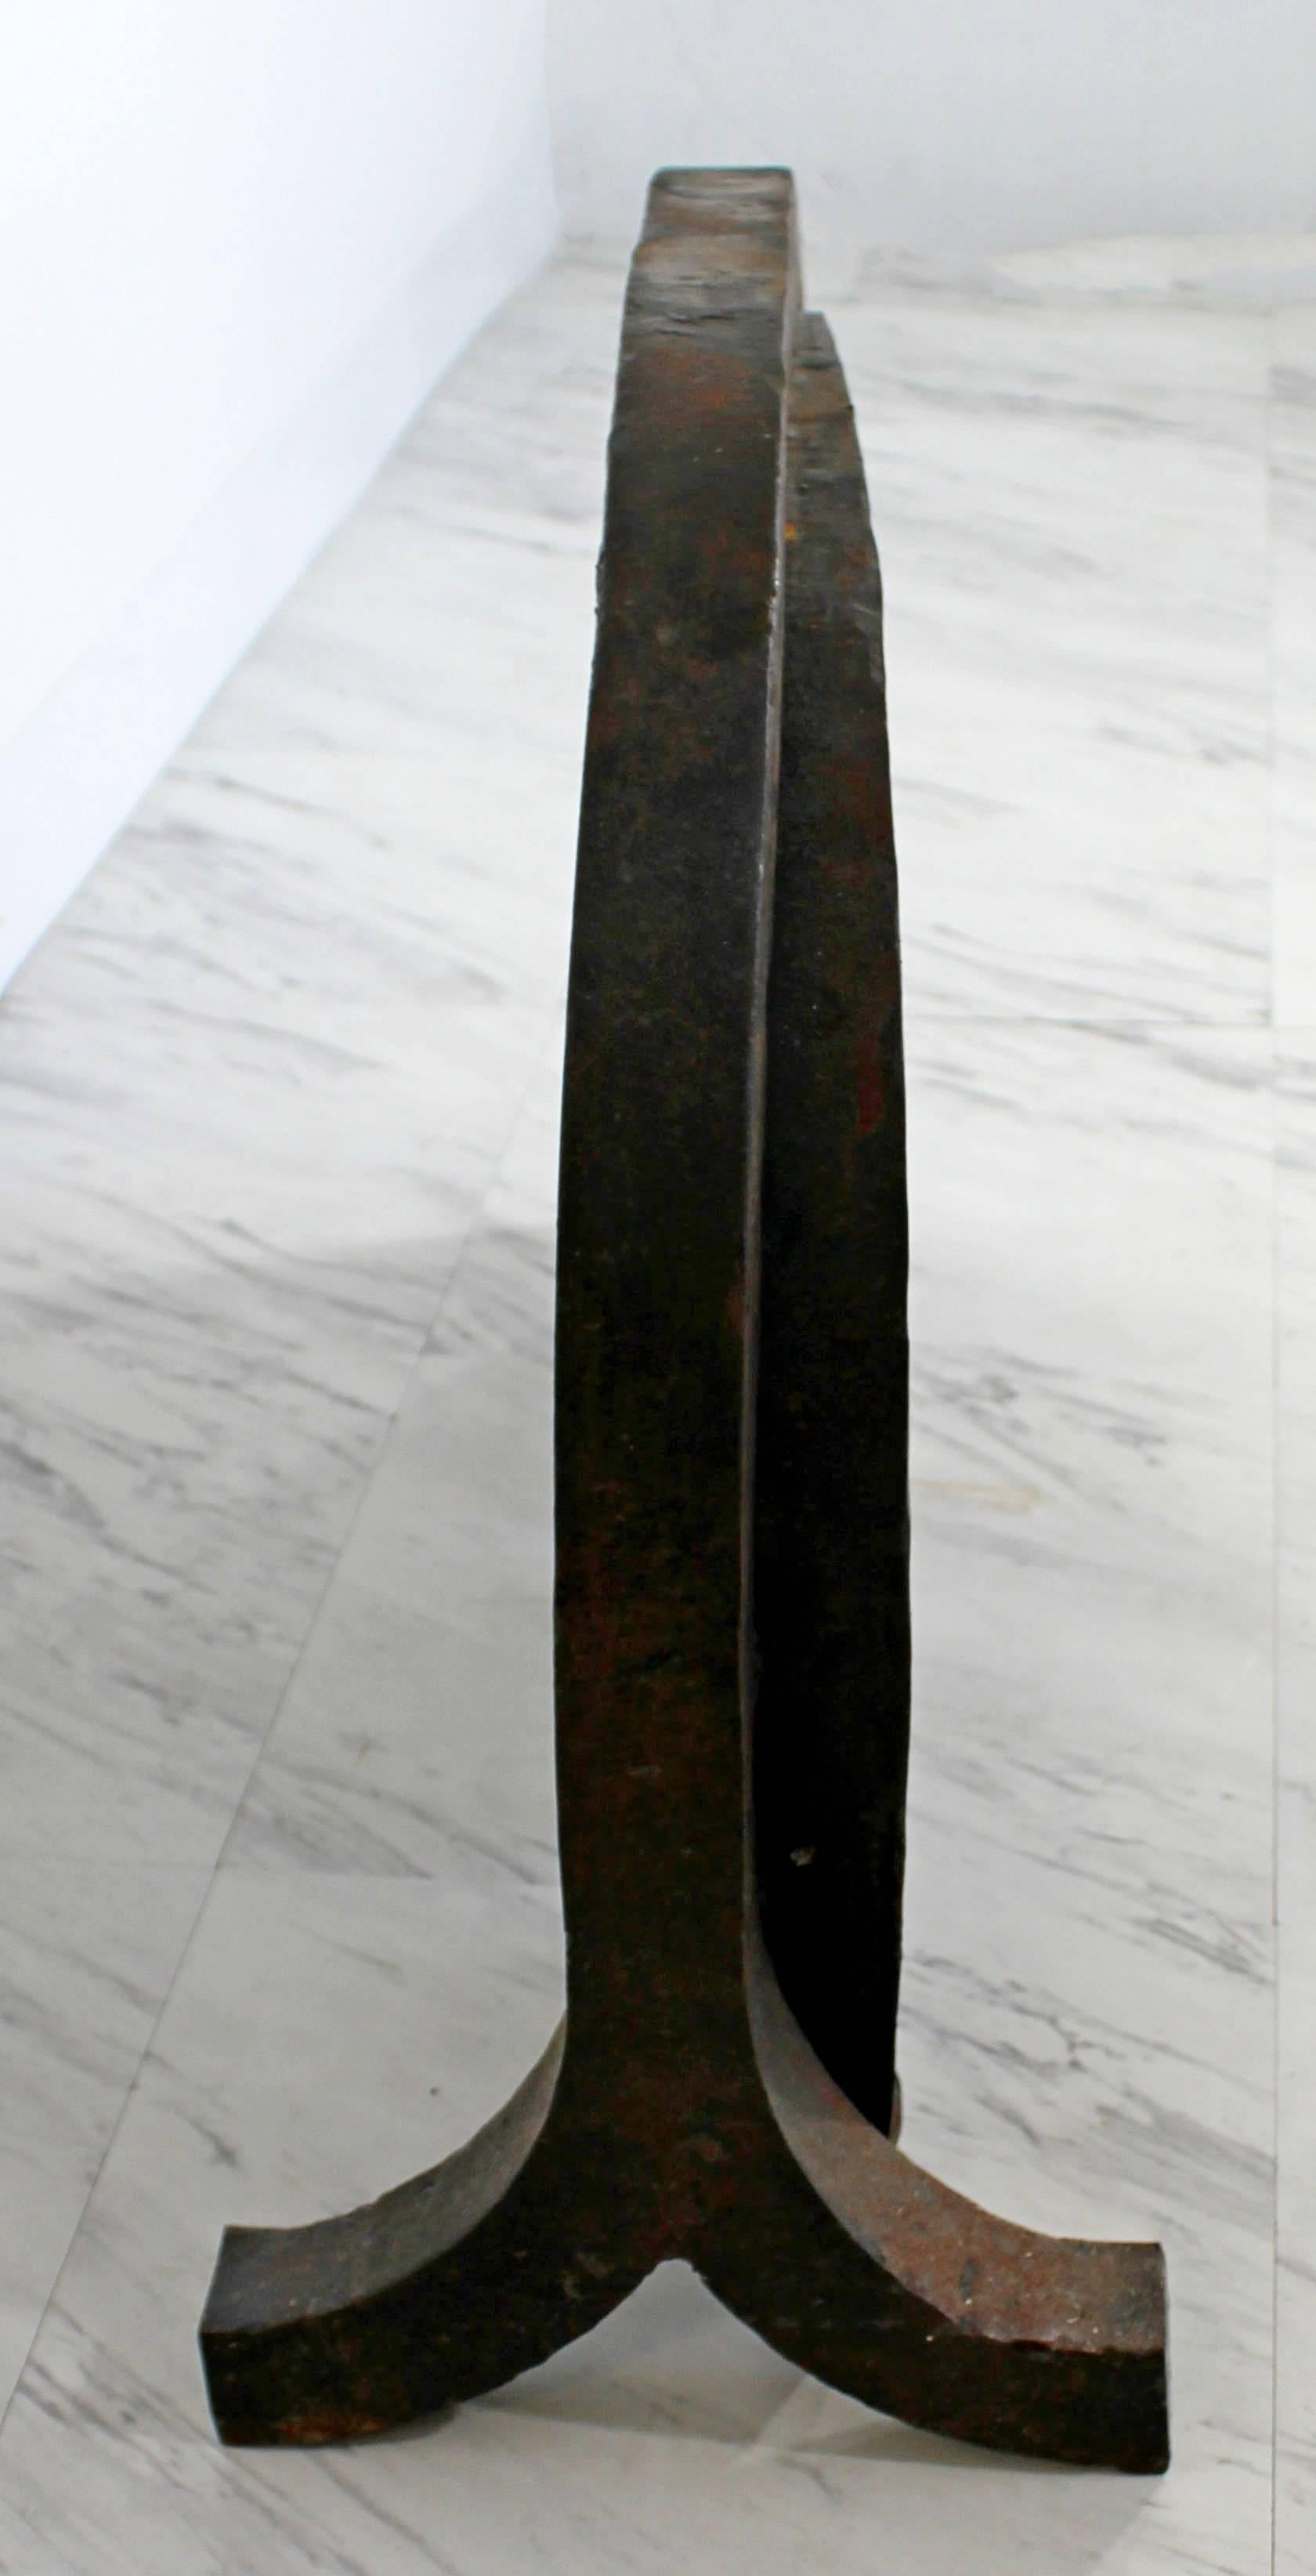 Spanish Forged Steel Sculpture by Martin Chirino Lopez Titled Laberintia, 1987